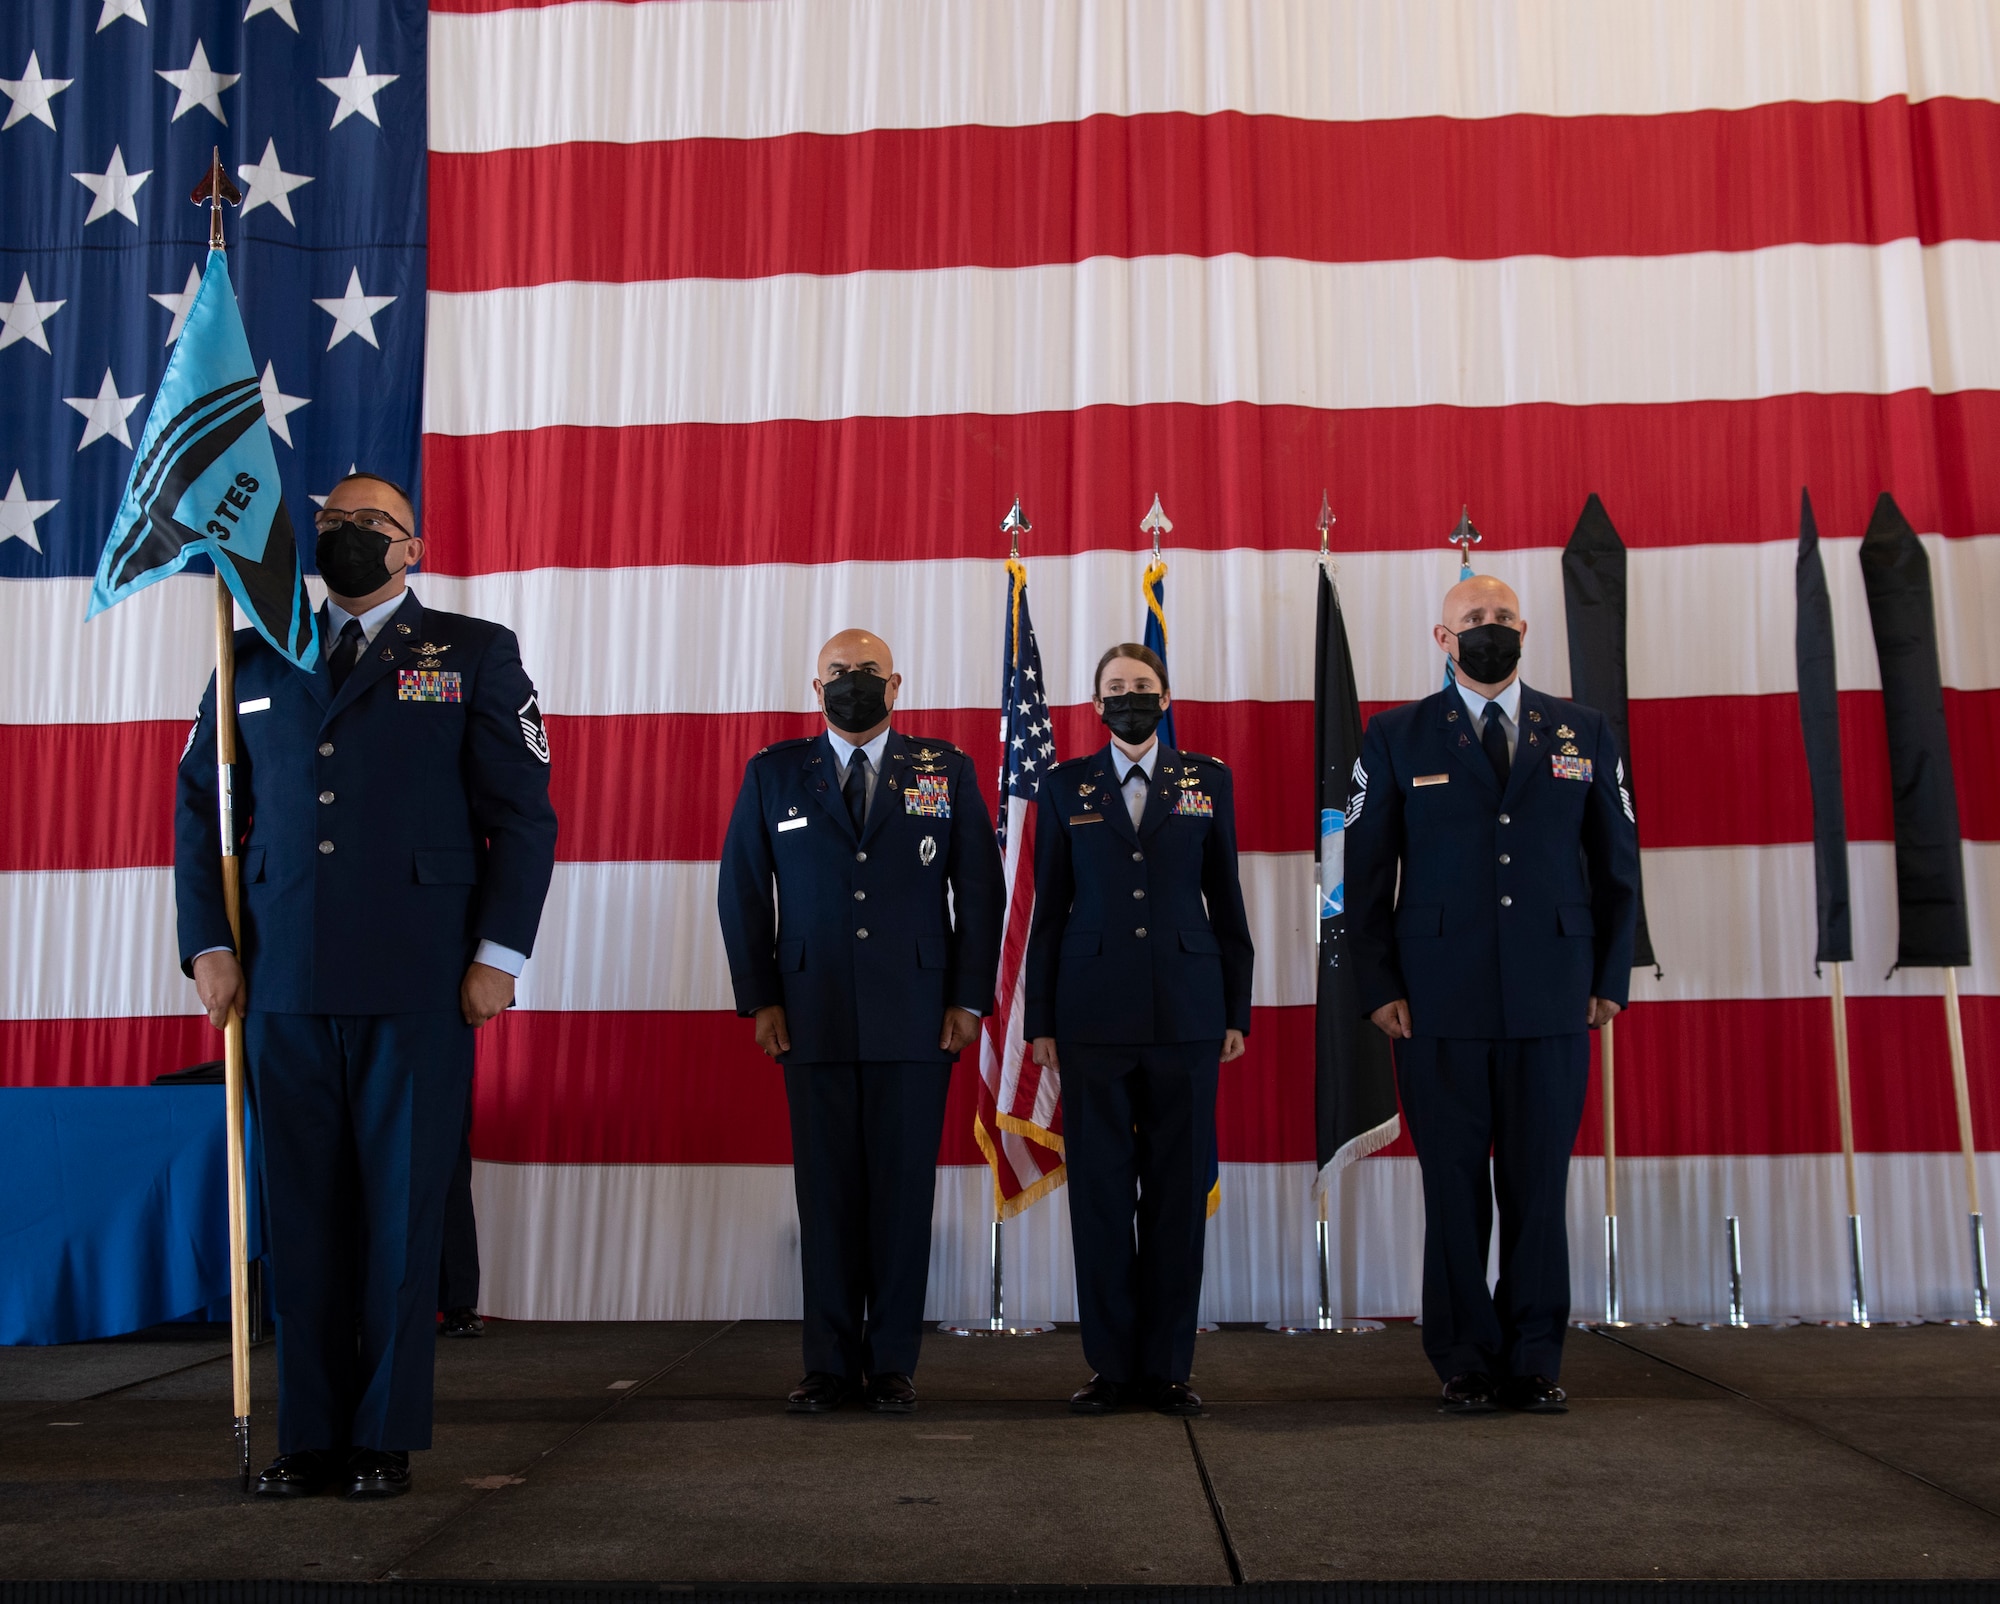 Service members stand at attention during ceremony